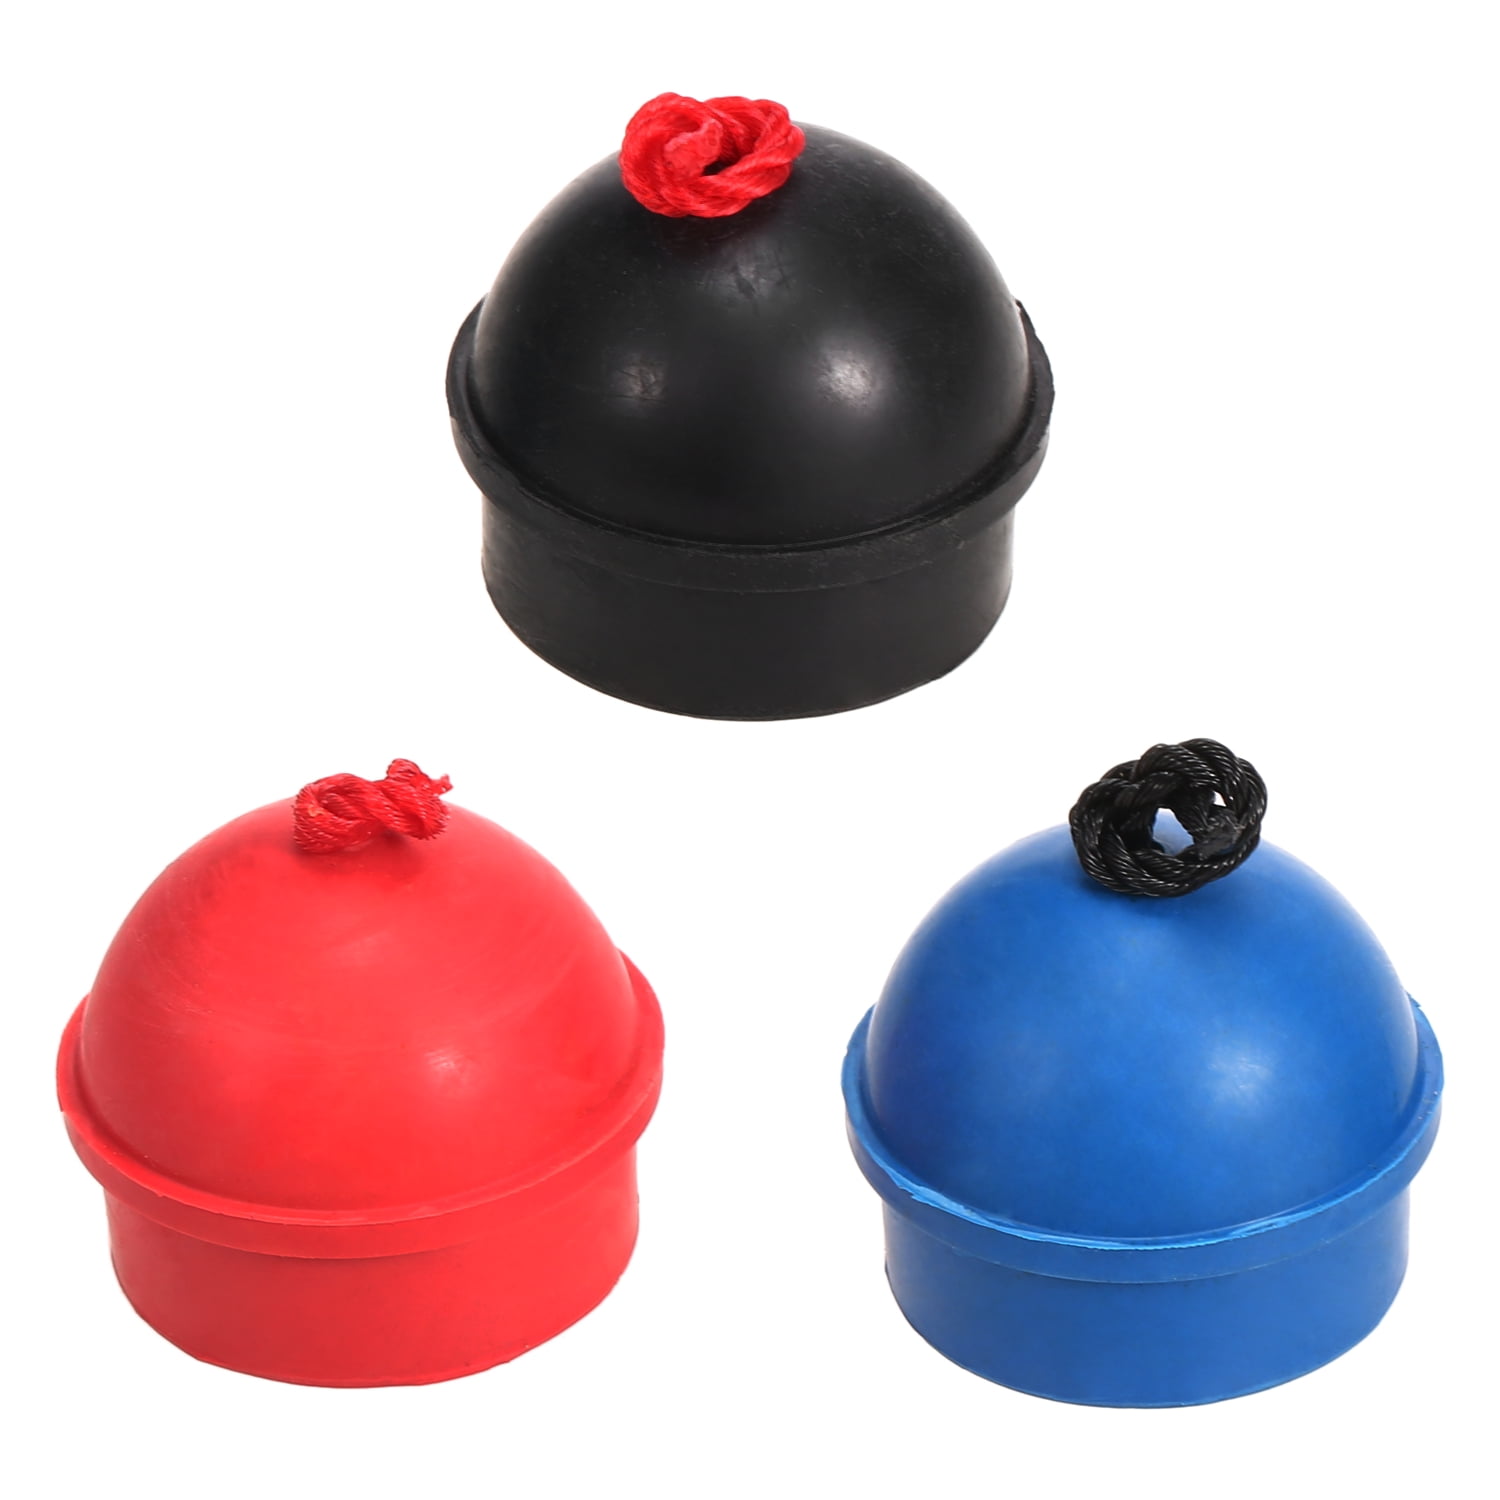 HONBAY 3pcs Mix Color Rubber Pool Table Billiard Cue Chalk Holders with String 